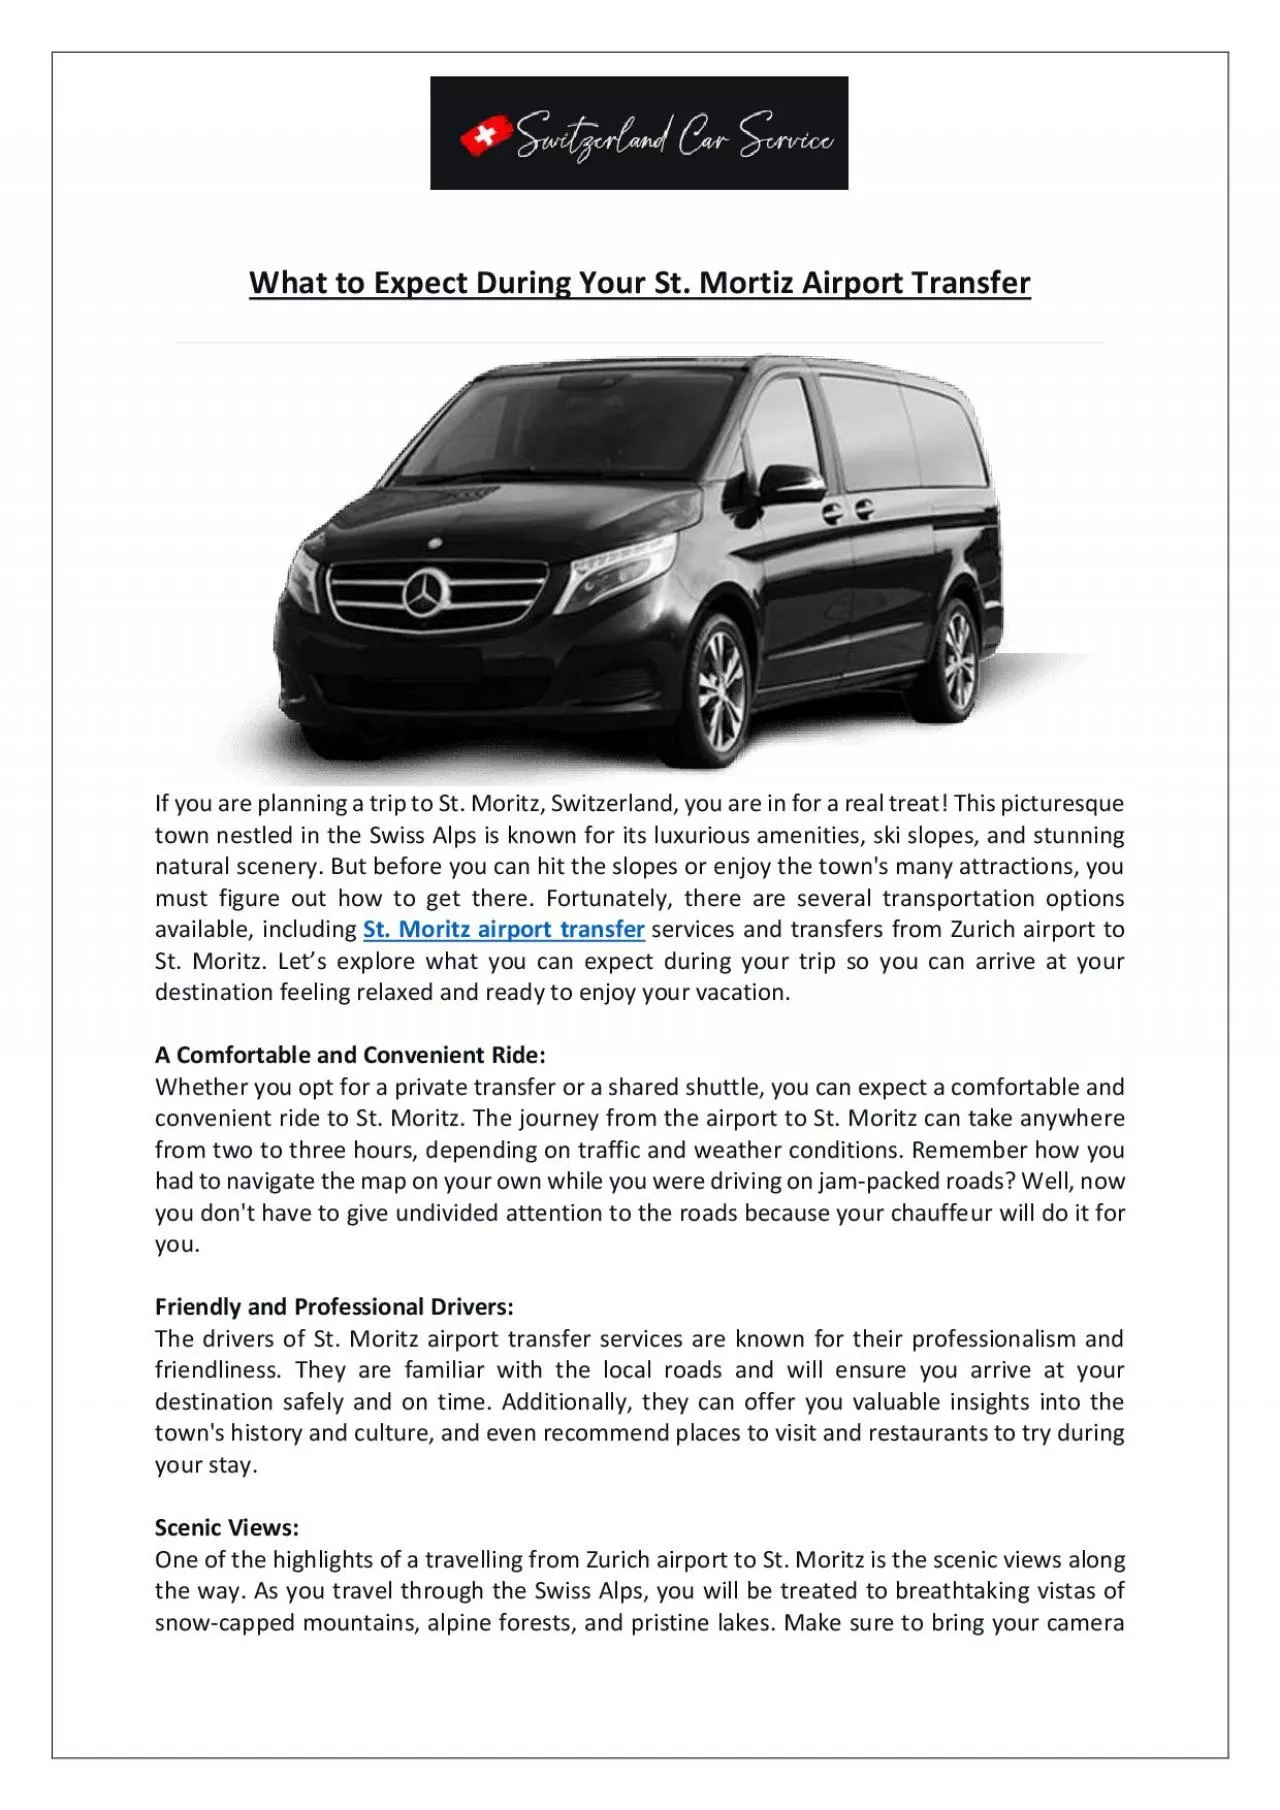 What to Expect During Your St. Mortiz Airport Transfer